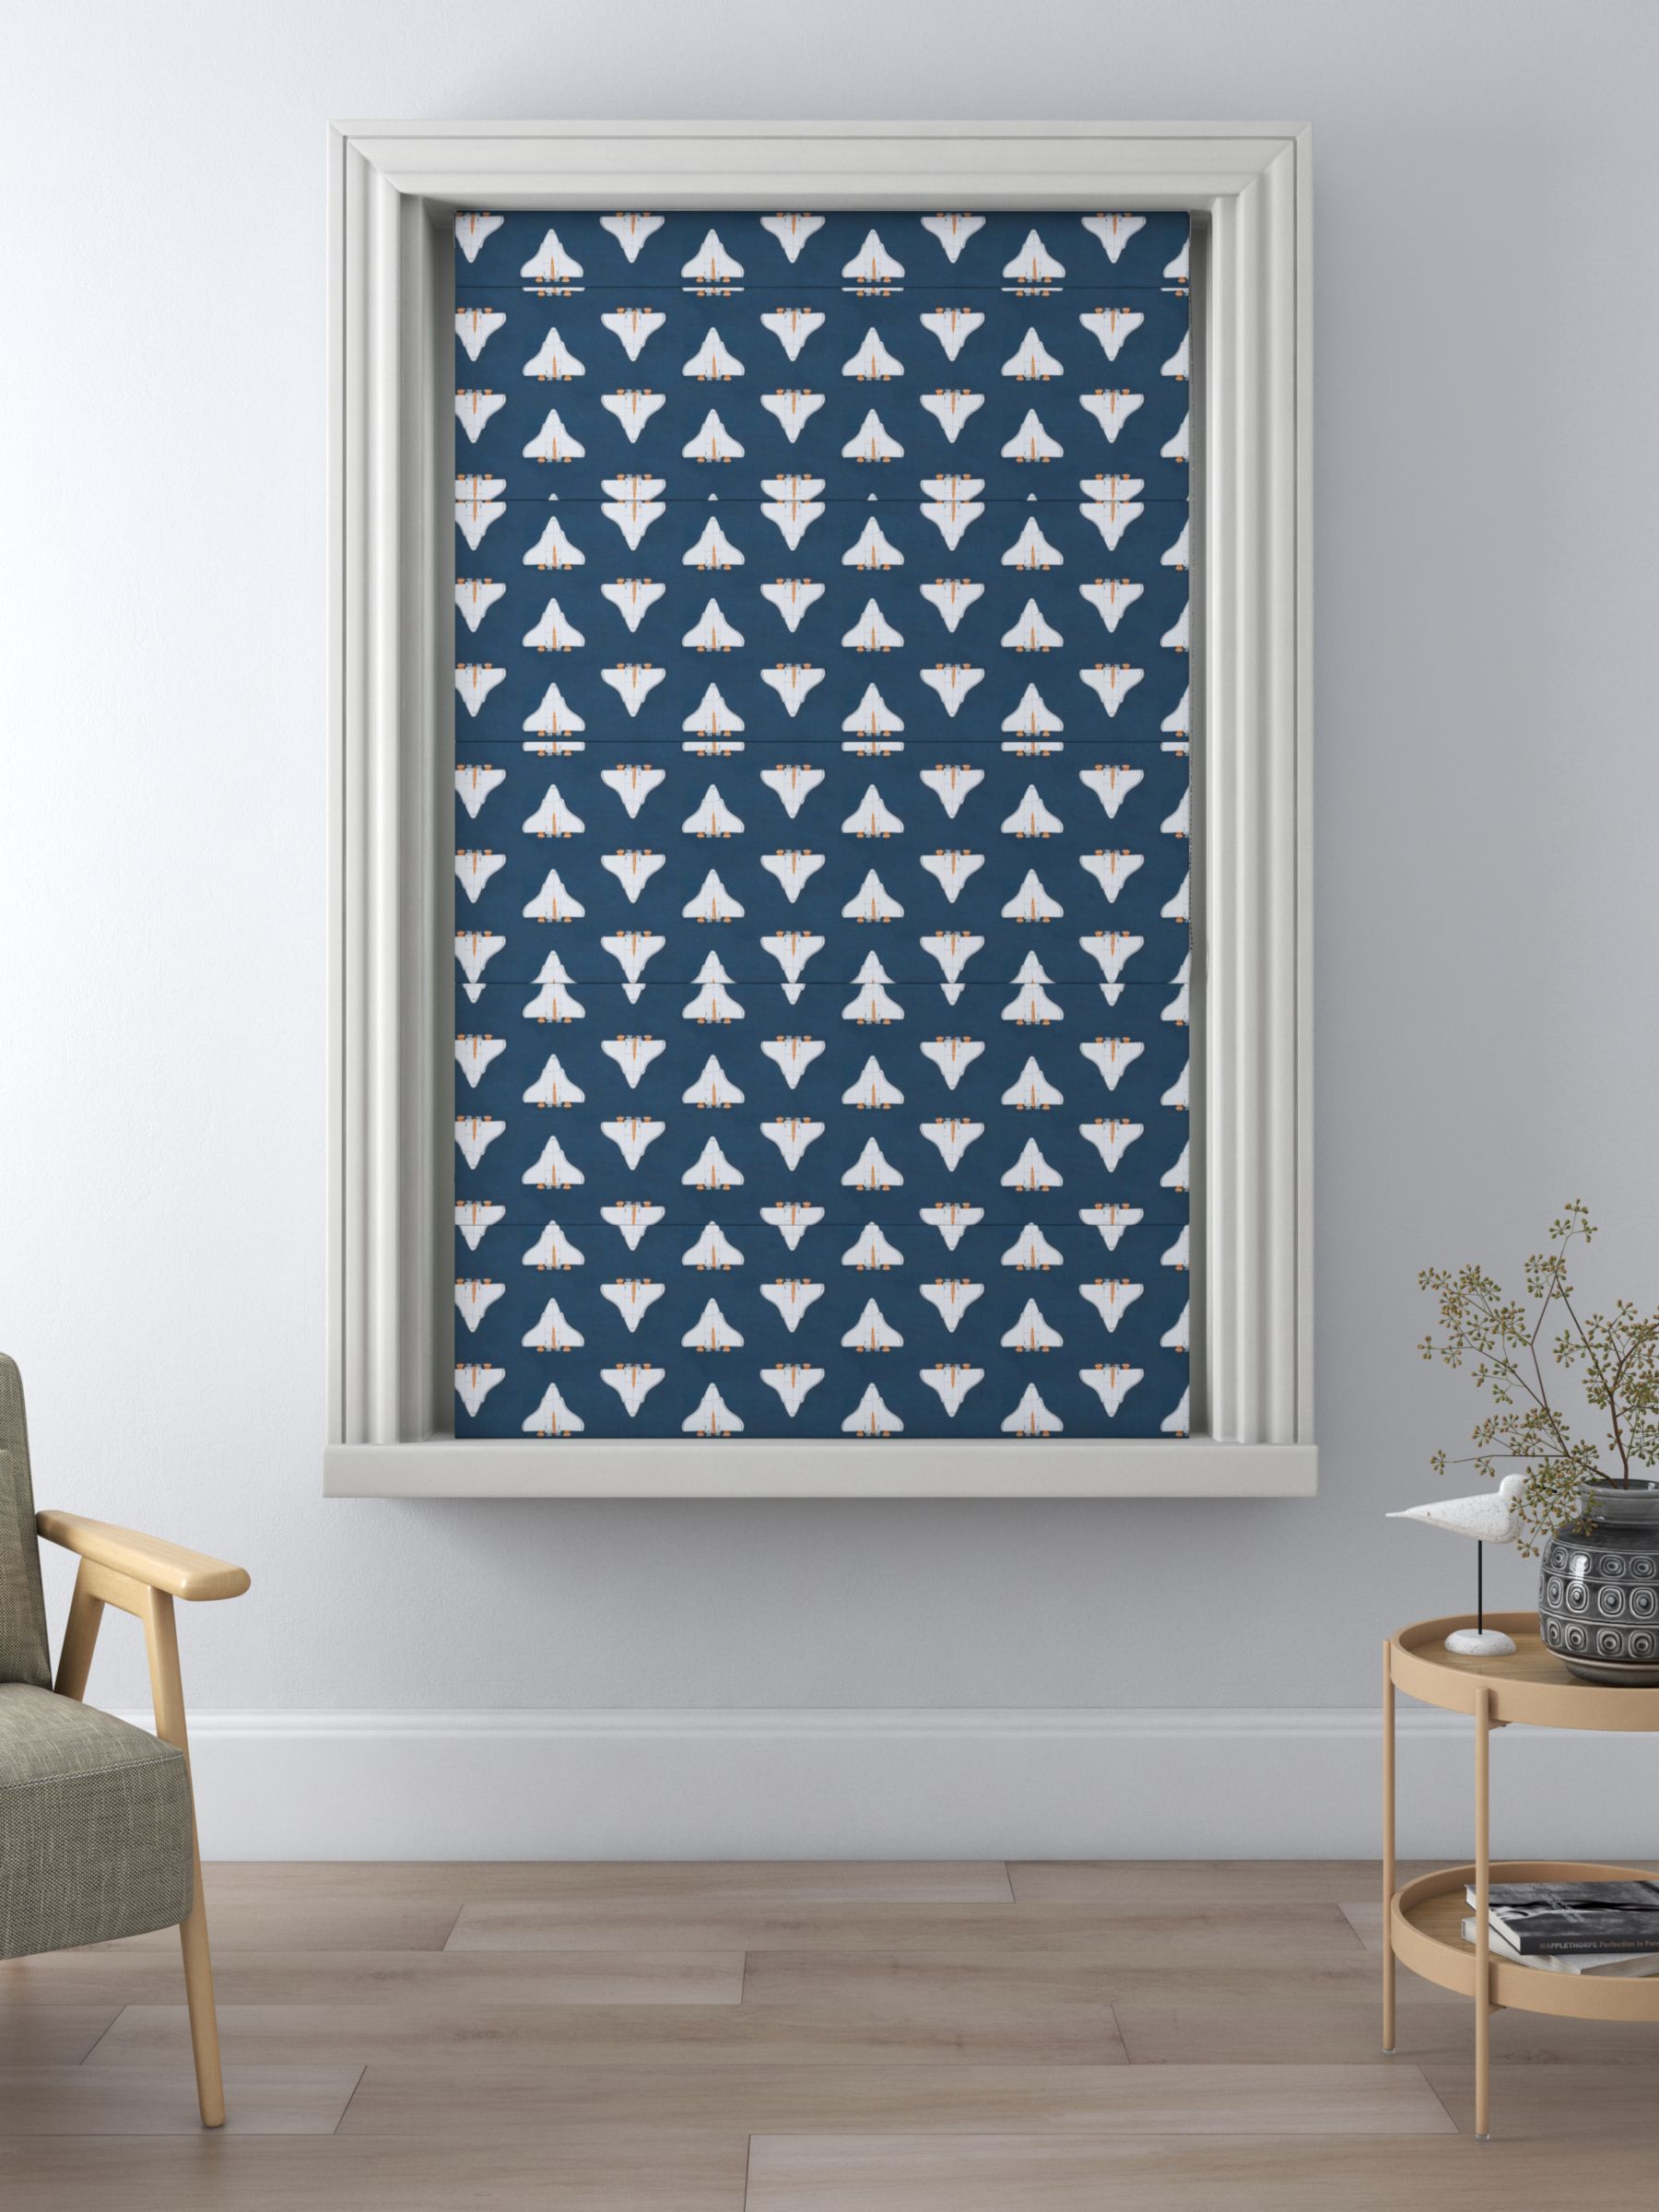 Harlequin Space Shuttle Made to Measure Curtains, Apricot/Navy